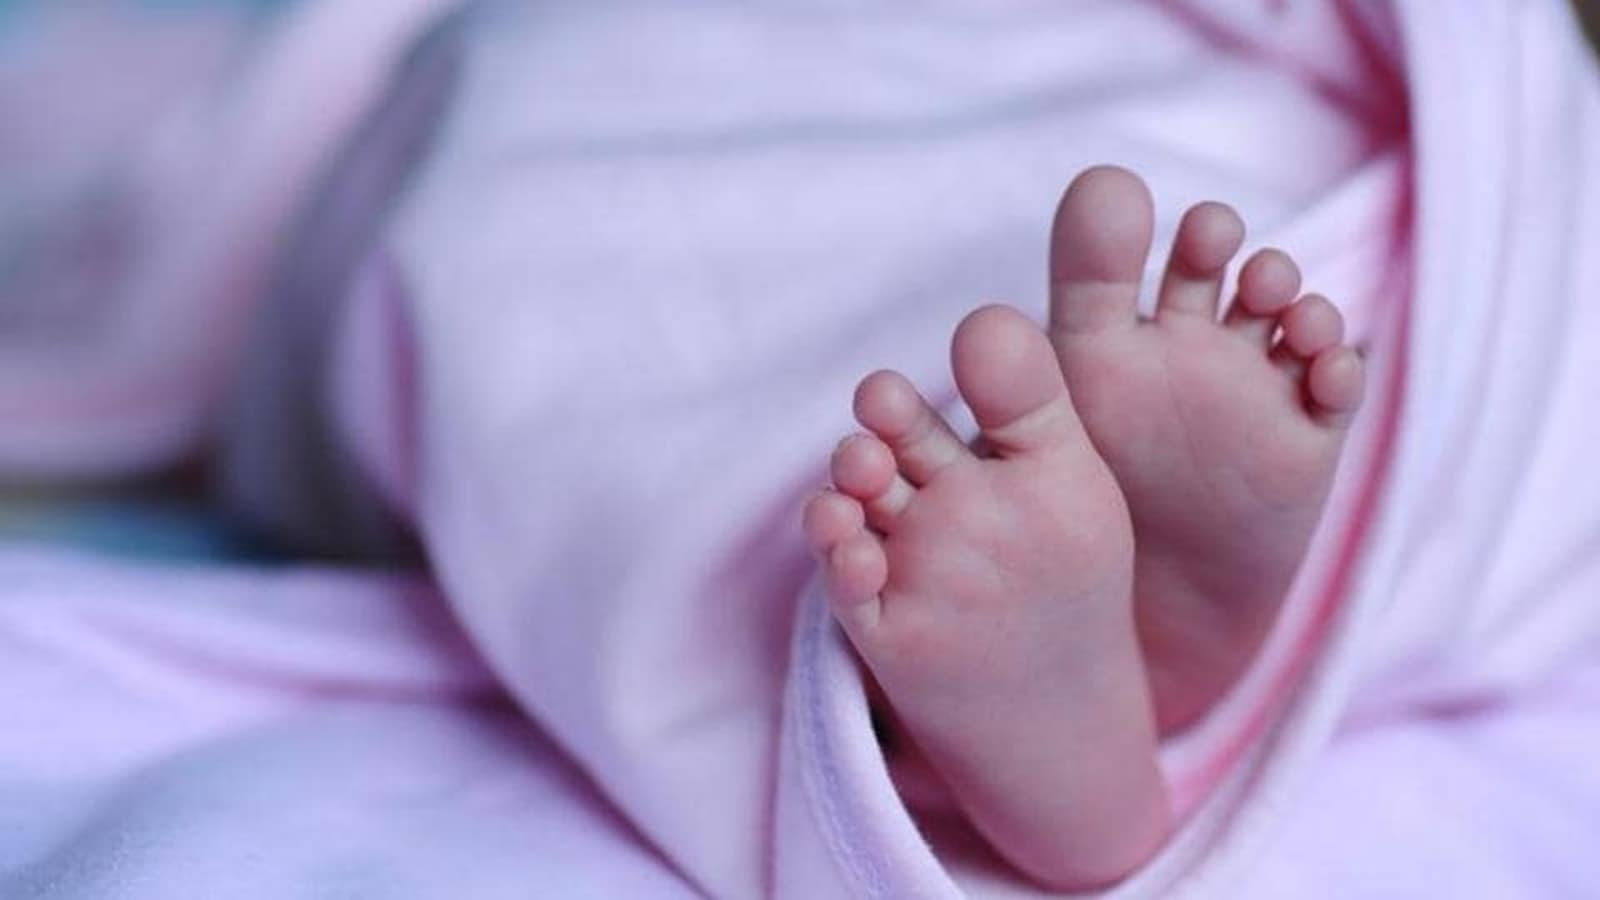 Fetus found growing in a 40-day-old infant in a rare medical condition